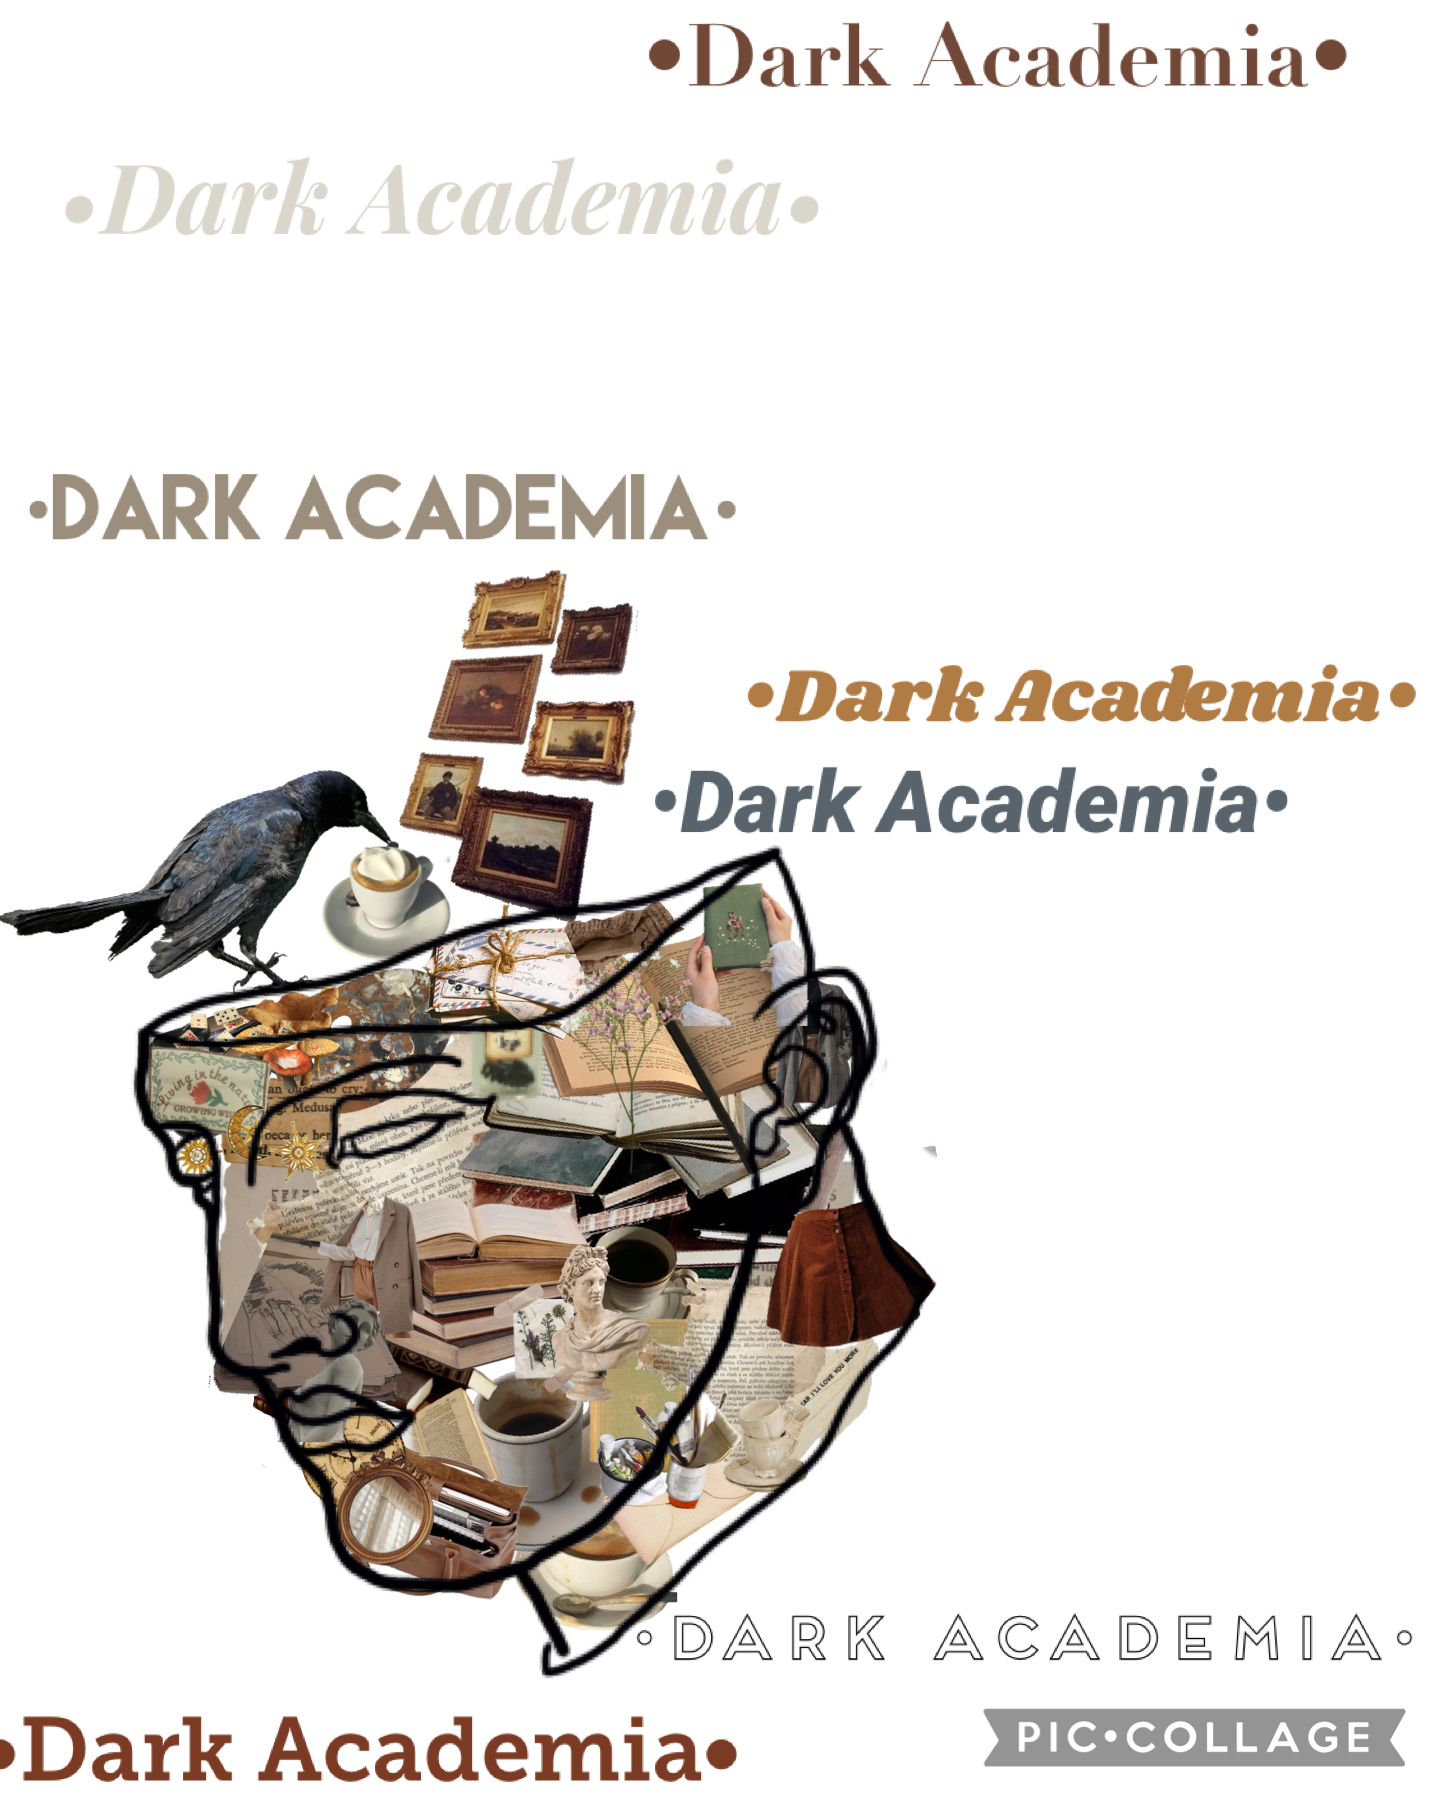 It’s fall! And in my eyes fall and Dark academia are the same thing! My aesthetics are cottage core and Dark Academia 🙂